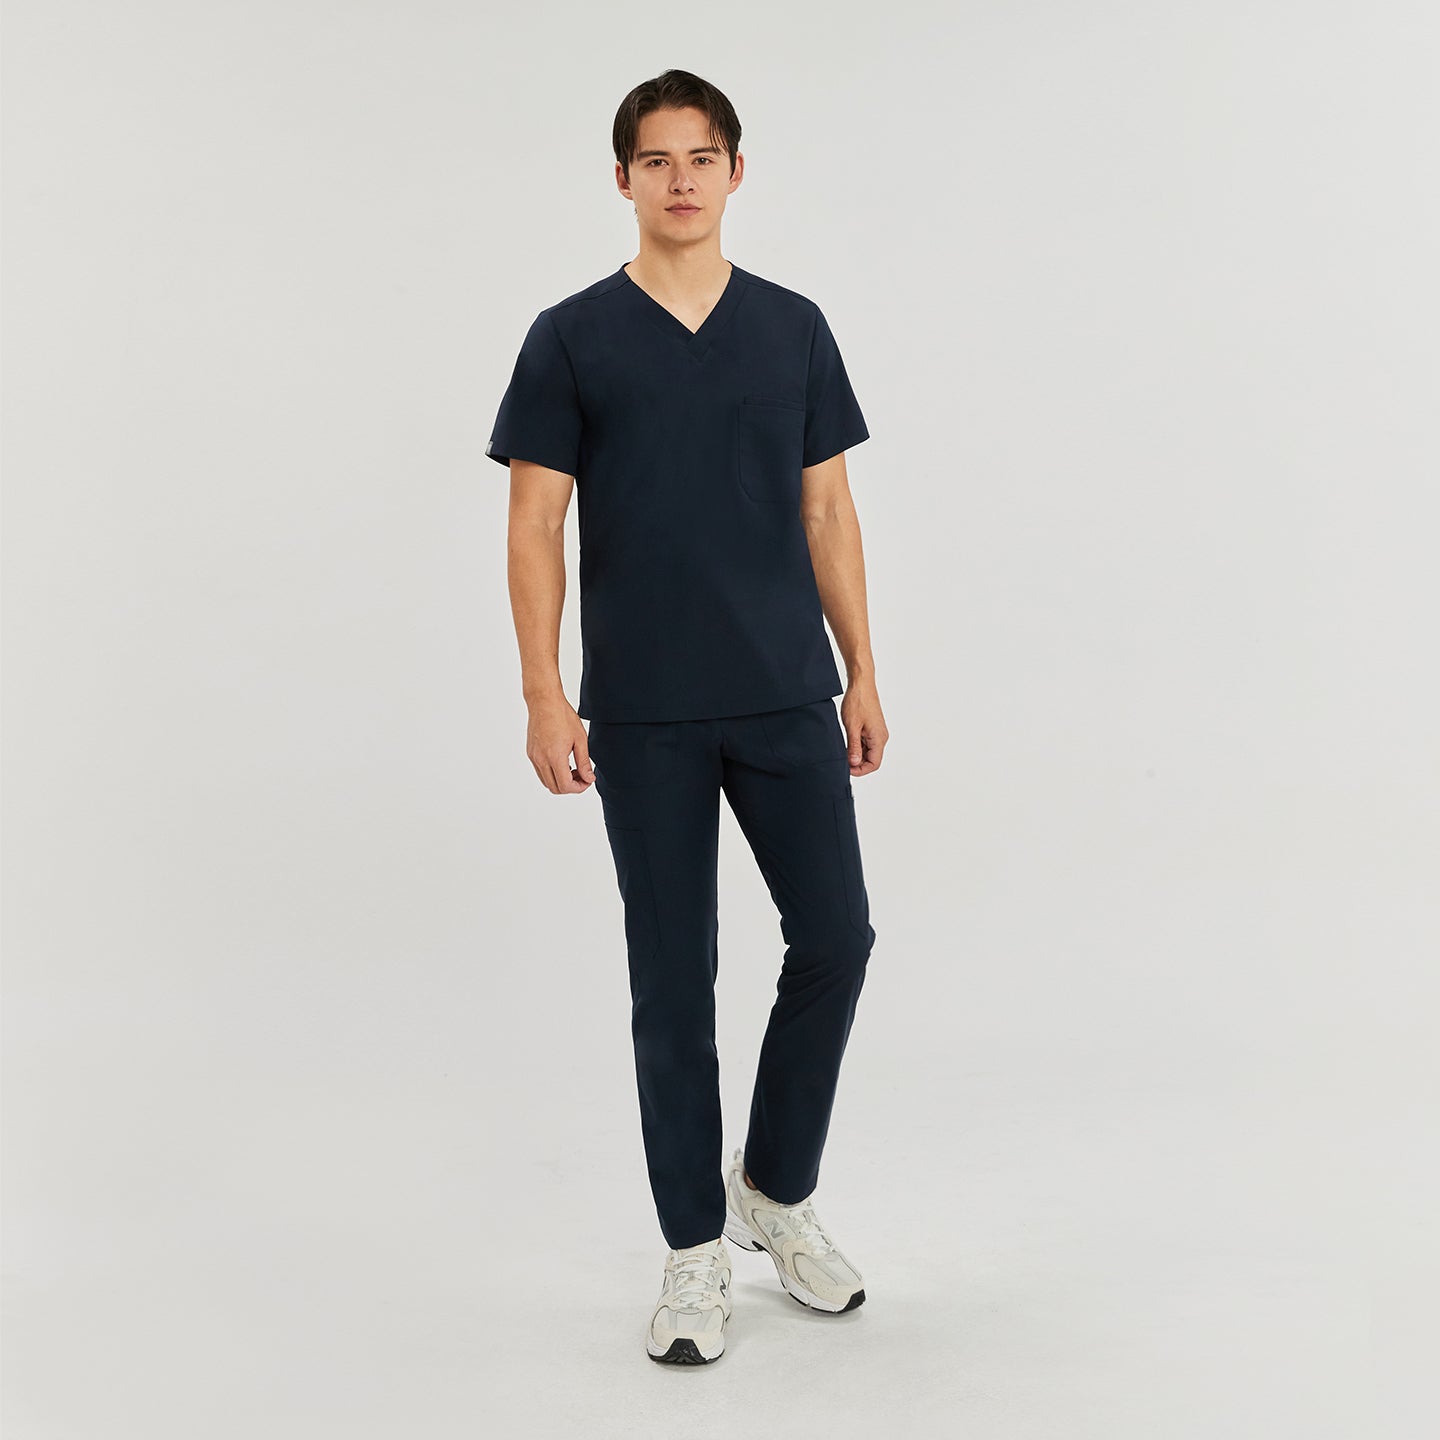  Full-body front view of a model in navy blue zipper straight scrub pants with zipper details and a matching top, wearing light-colored sneakers,Navy